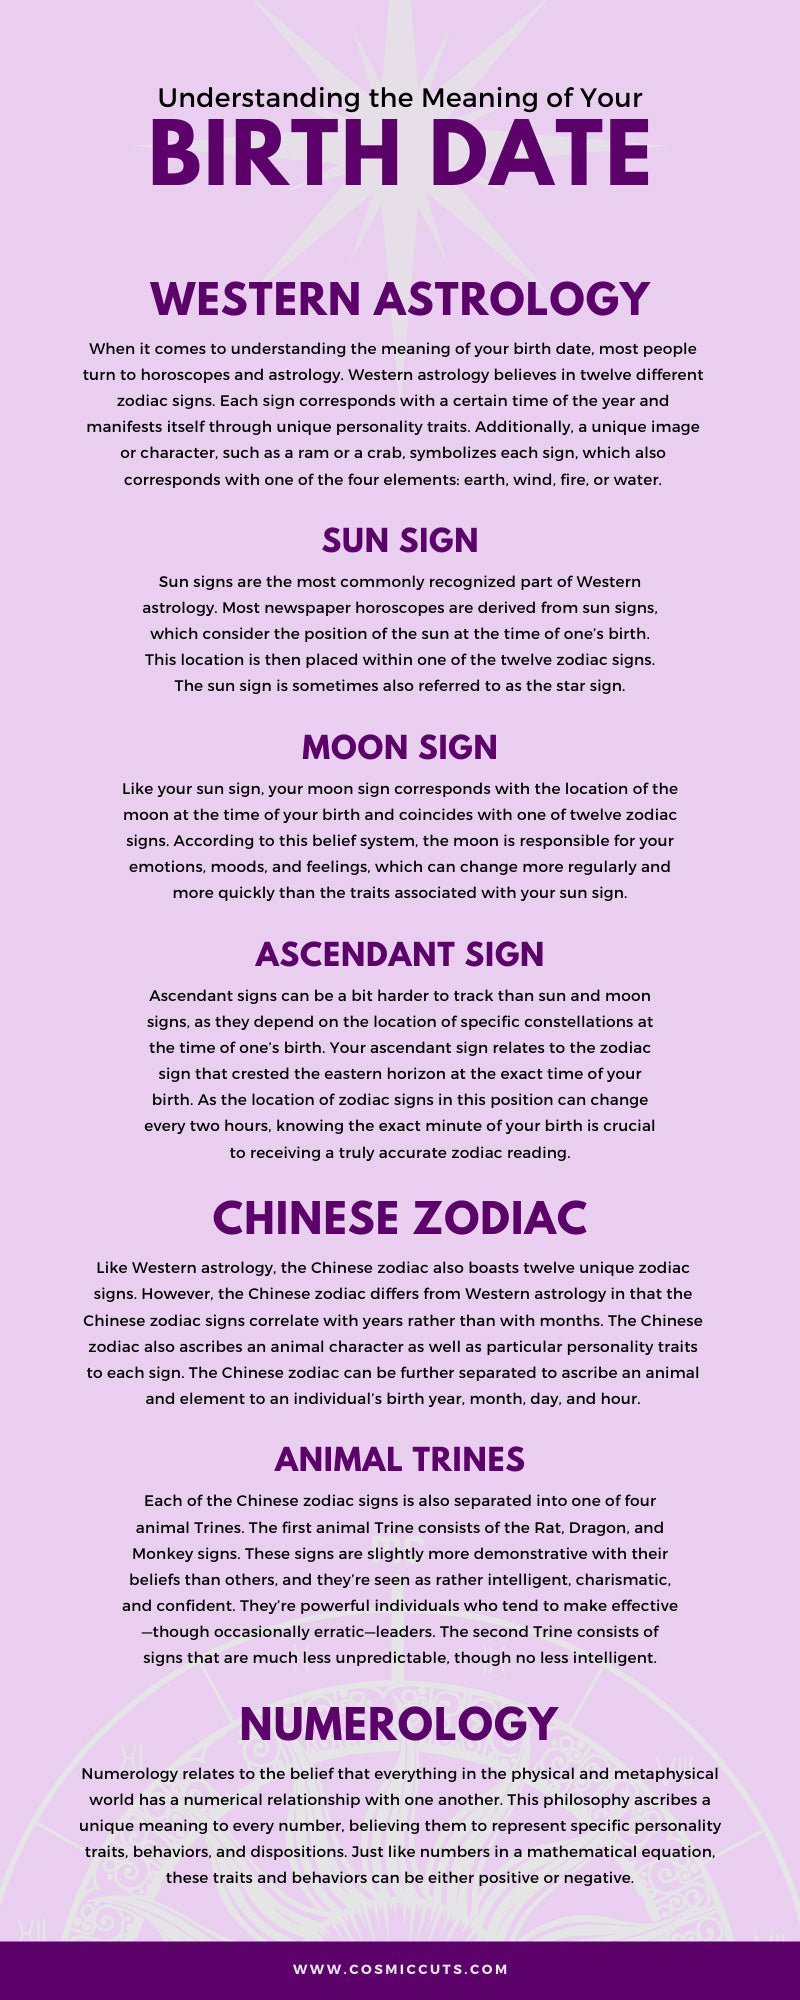 Understanding the Meaning of Your Birth Date infographic